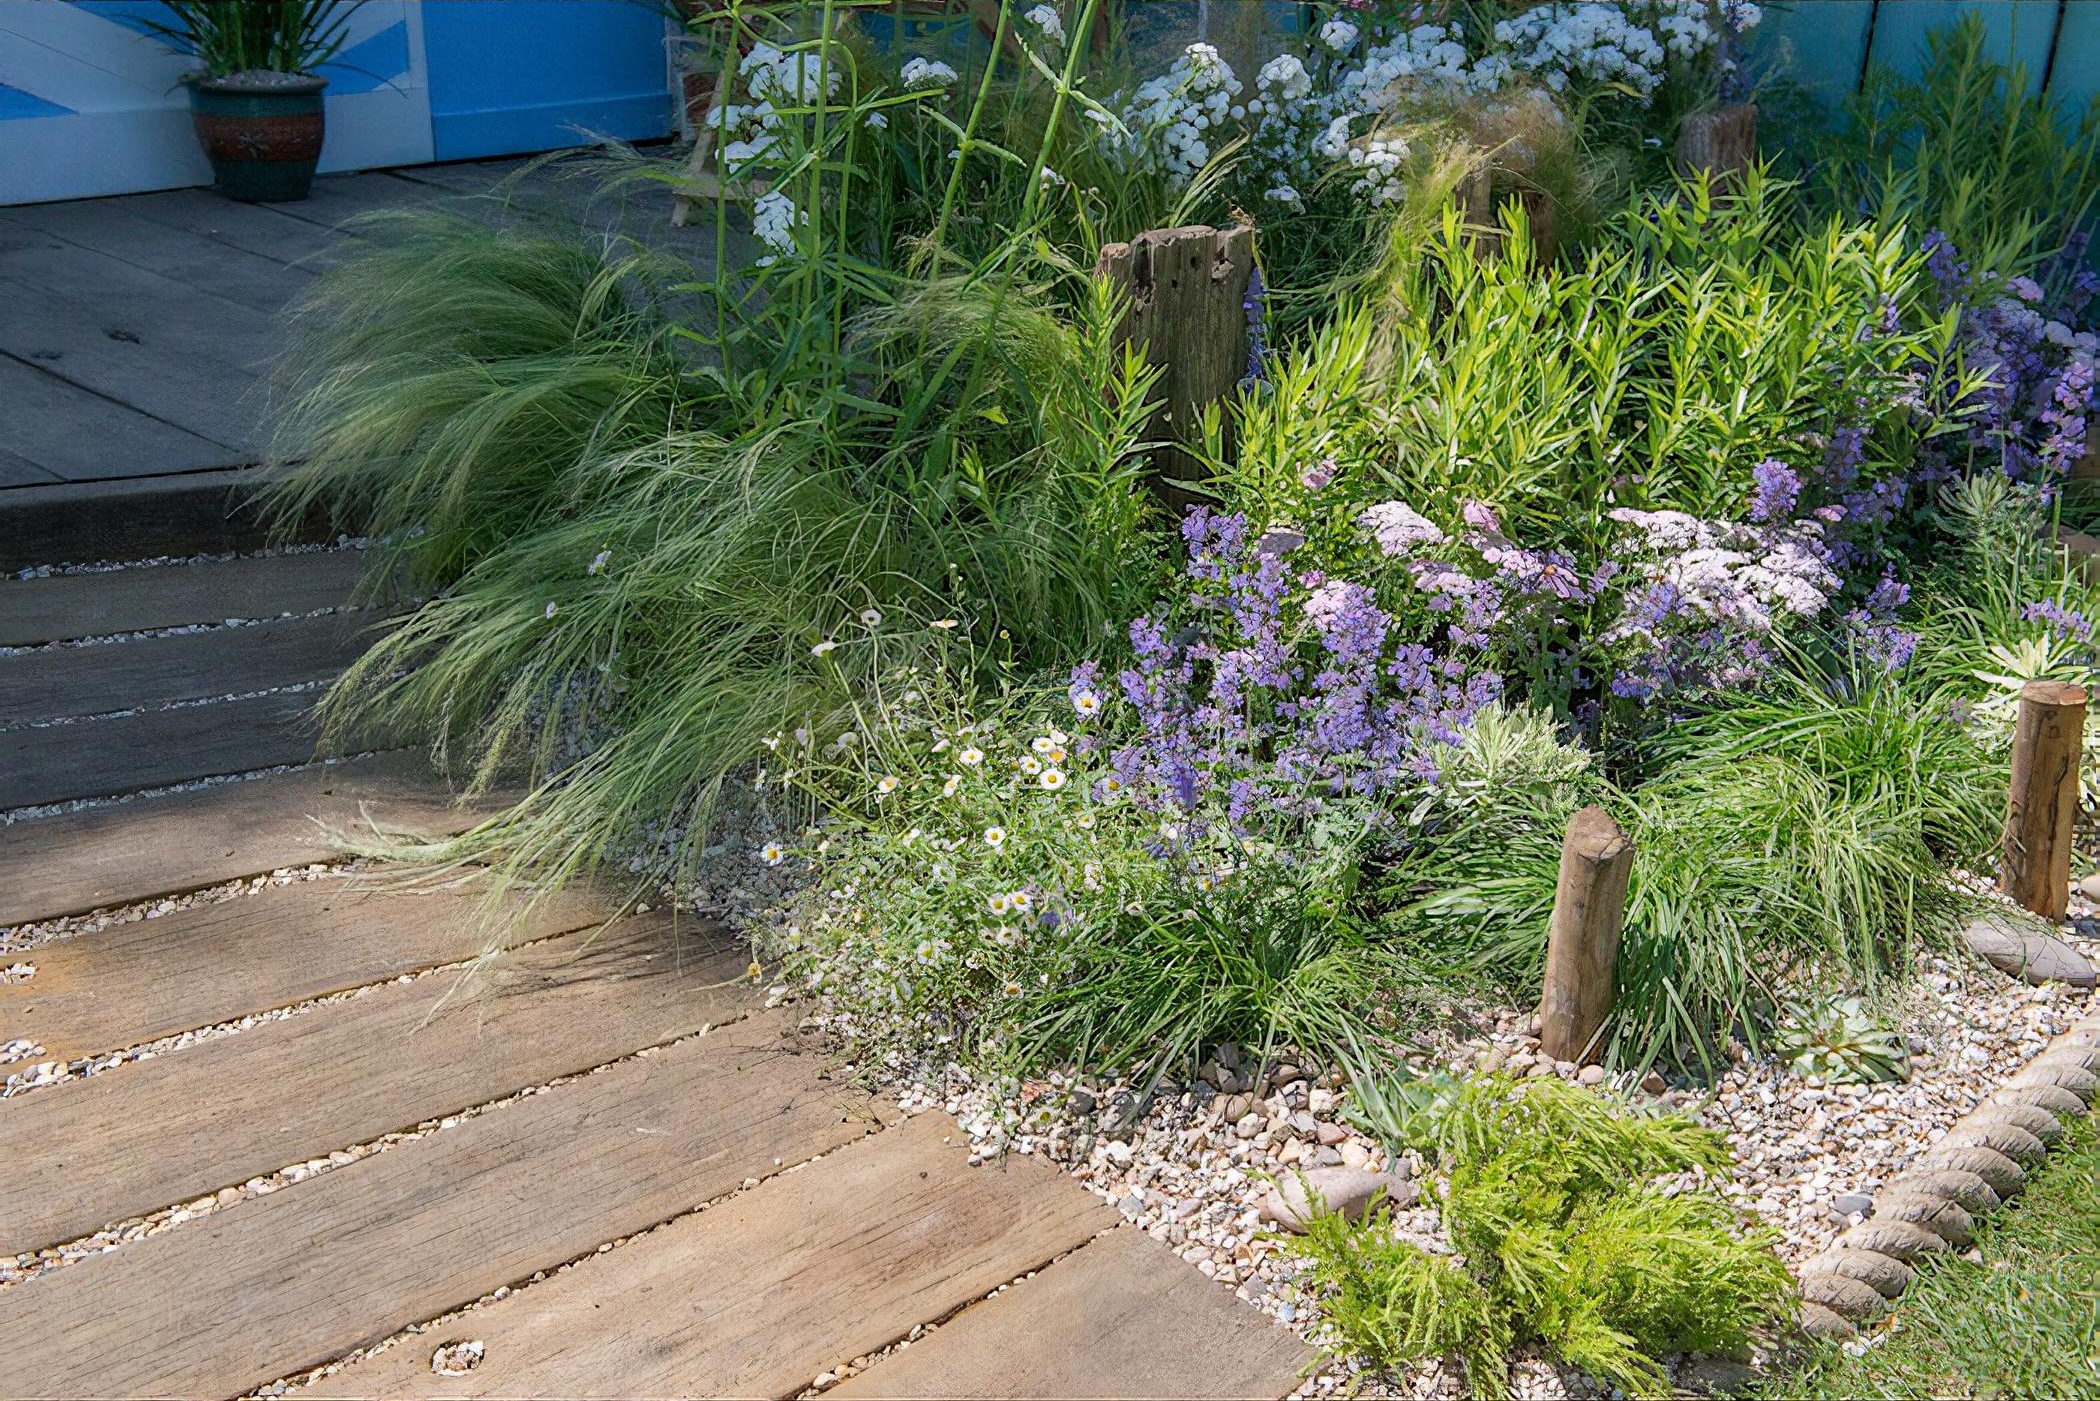 By garden designers James Callicott and Tony Wagstaff. Inspired by the coastline of Southend-on-Sea, the pier and the surrounding beach, the Southend Council ‘By The Sea’ garden offers a peaceful idyll situated by the coast.